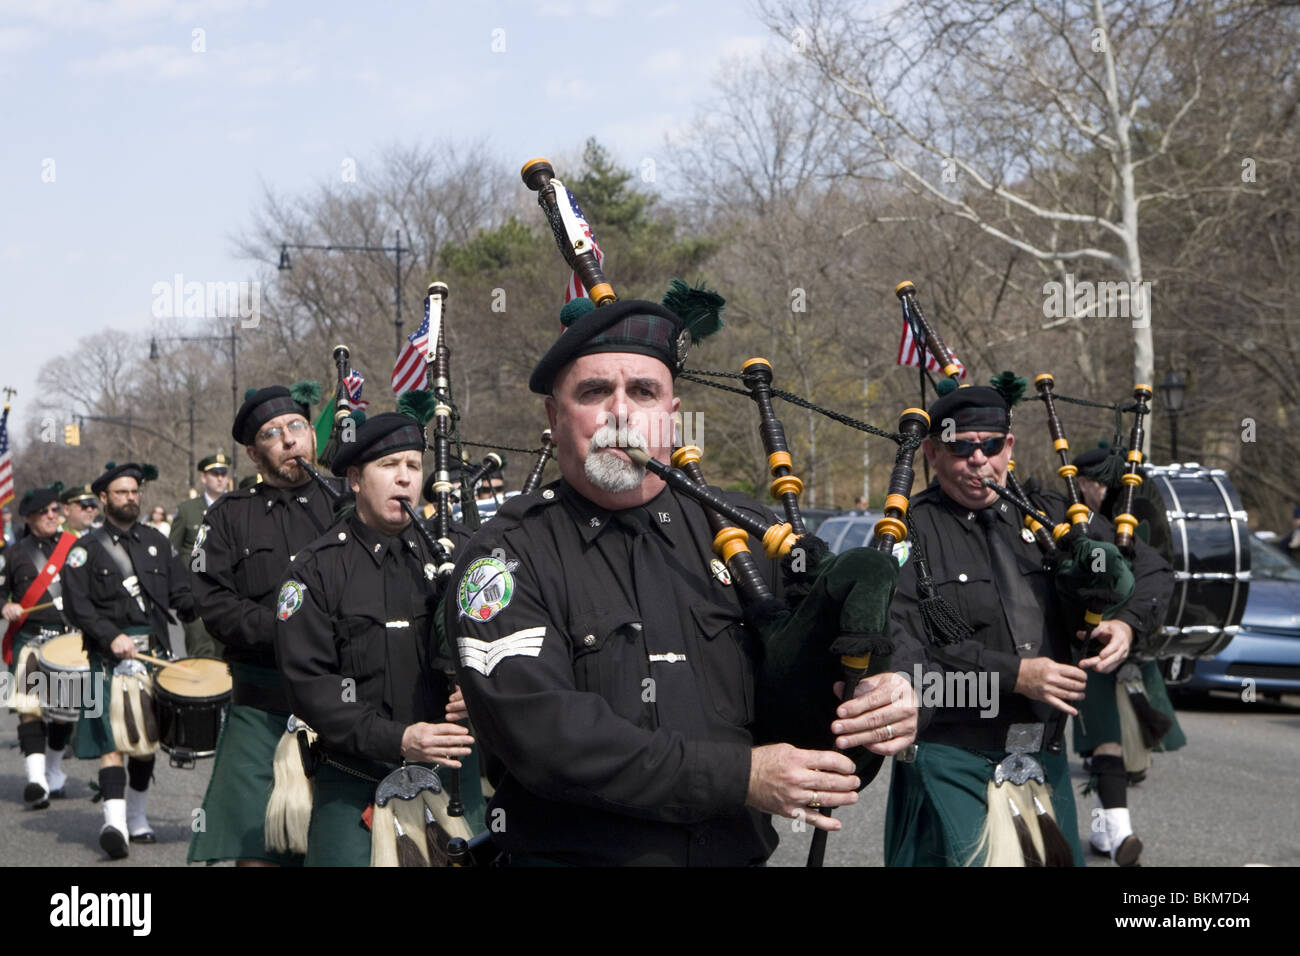 Brooklyn Irish American Day Parade takes place close to Saint Patrick's Day each year in Park Slope, Brooklyn, NY Stock Photo